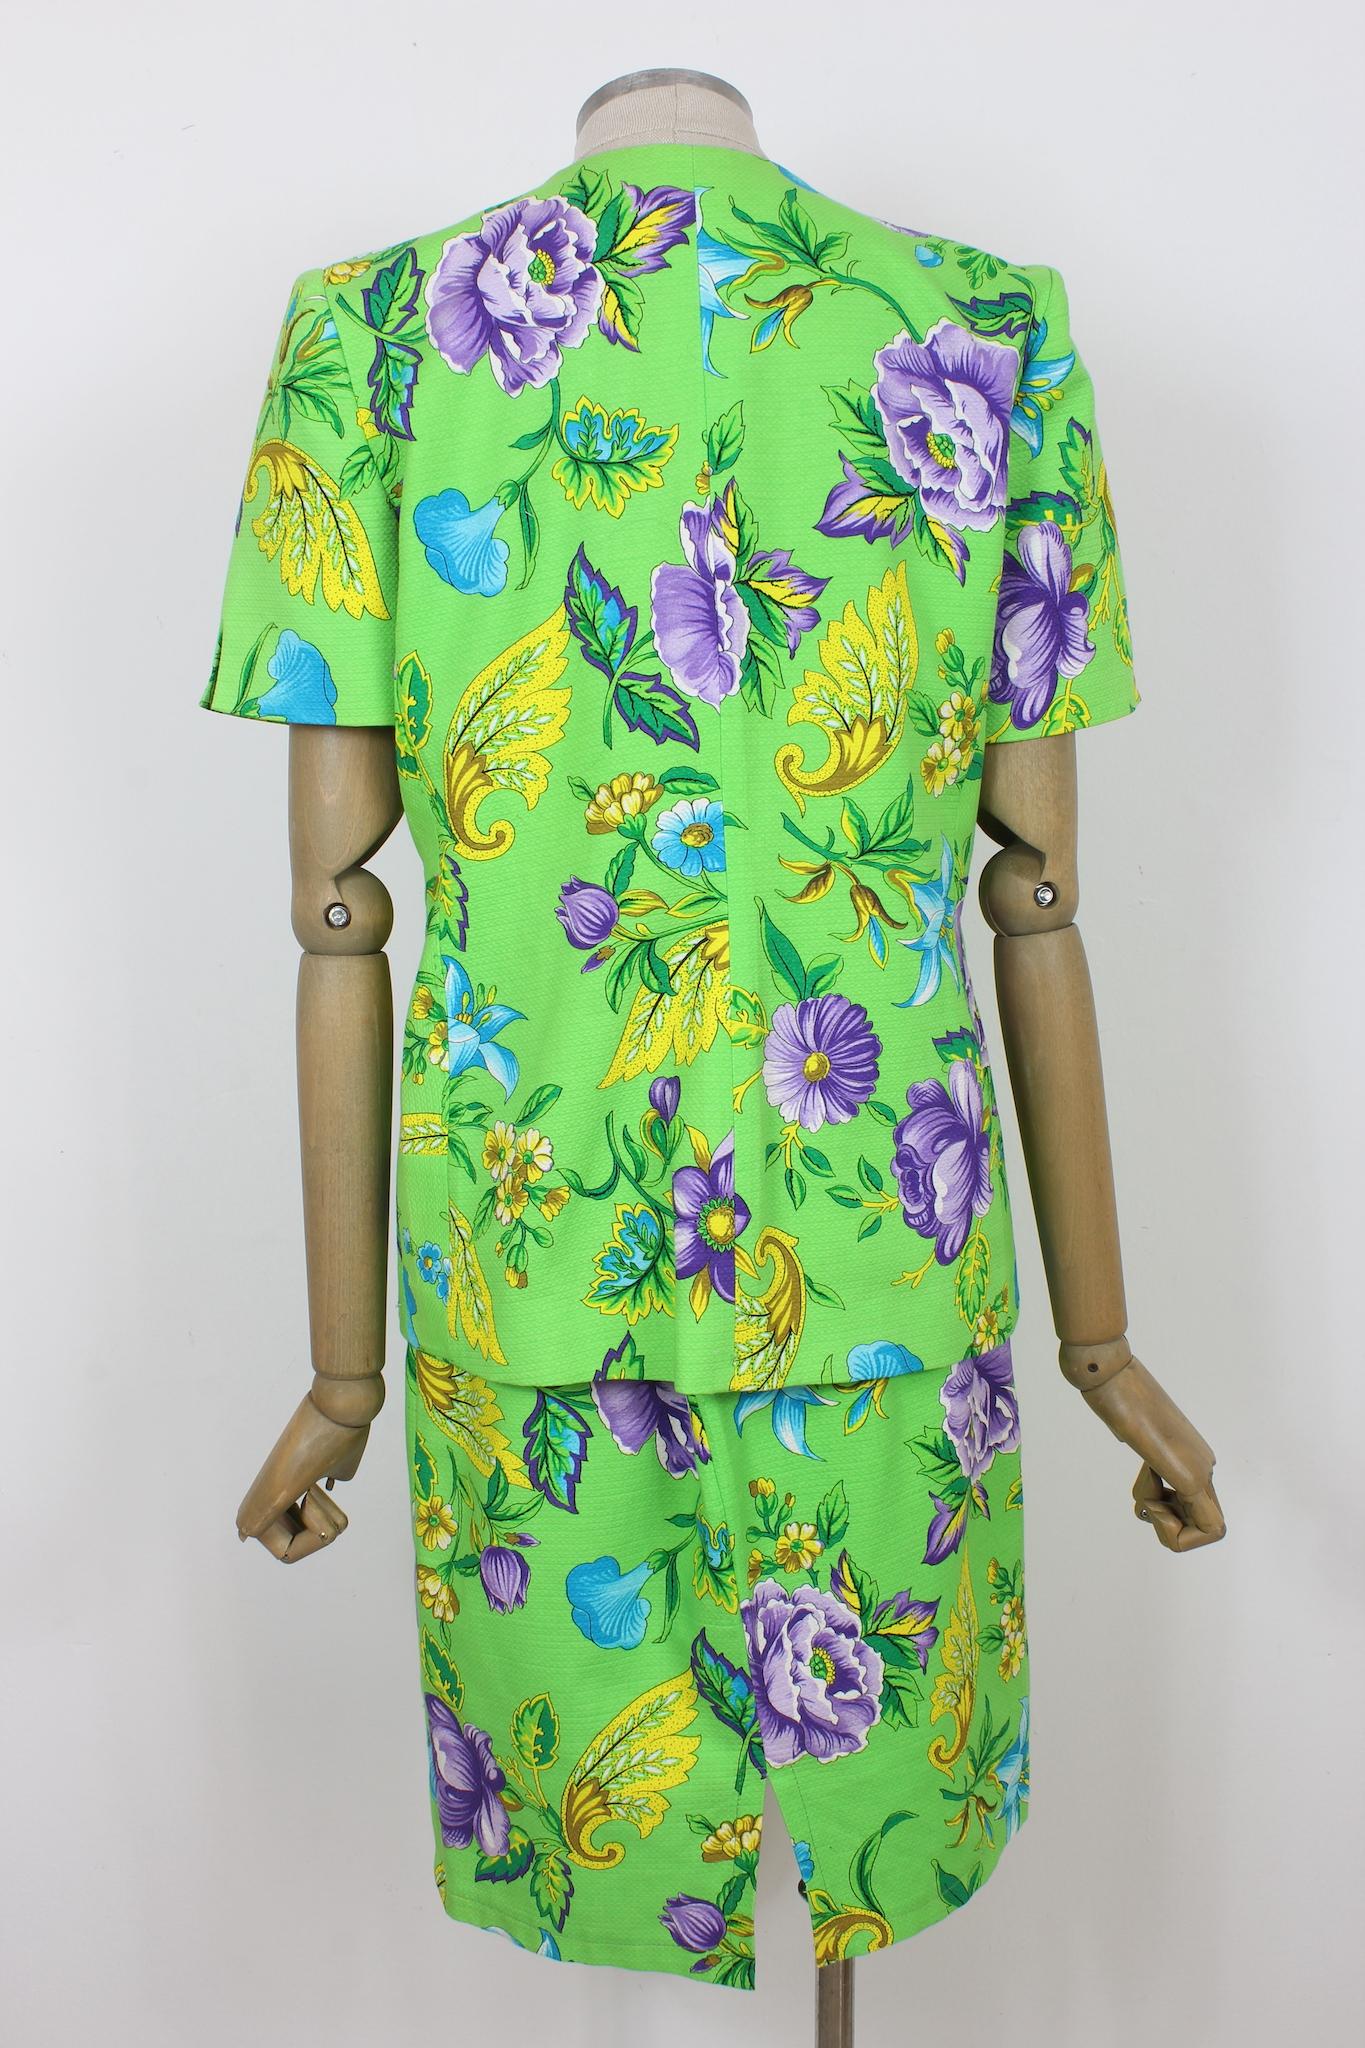 Gai Mattiolo 90s vintage women's skirt suit. Elegant suit, green with purple floral pattern. Jacket closure with jewel button, short sleeves, sheath model skirt. Cotton fabric. Made in italy.

Size: 42 It 8 Us 10 Uk

Shoulder: 42cm
Bust/Chest: 50